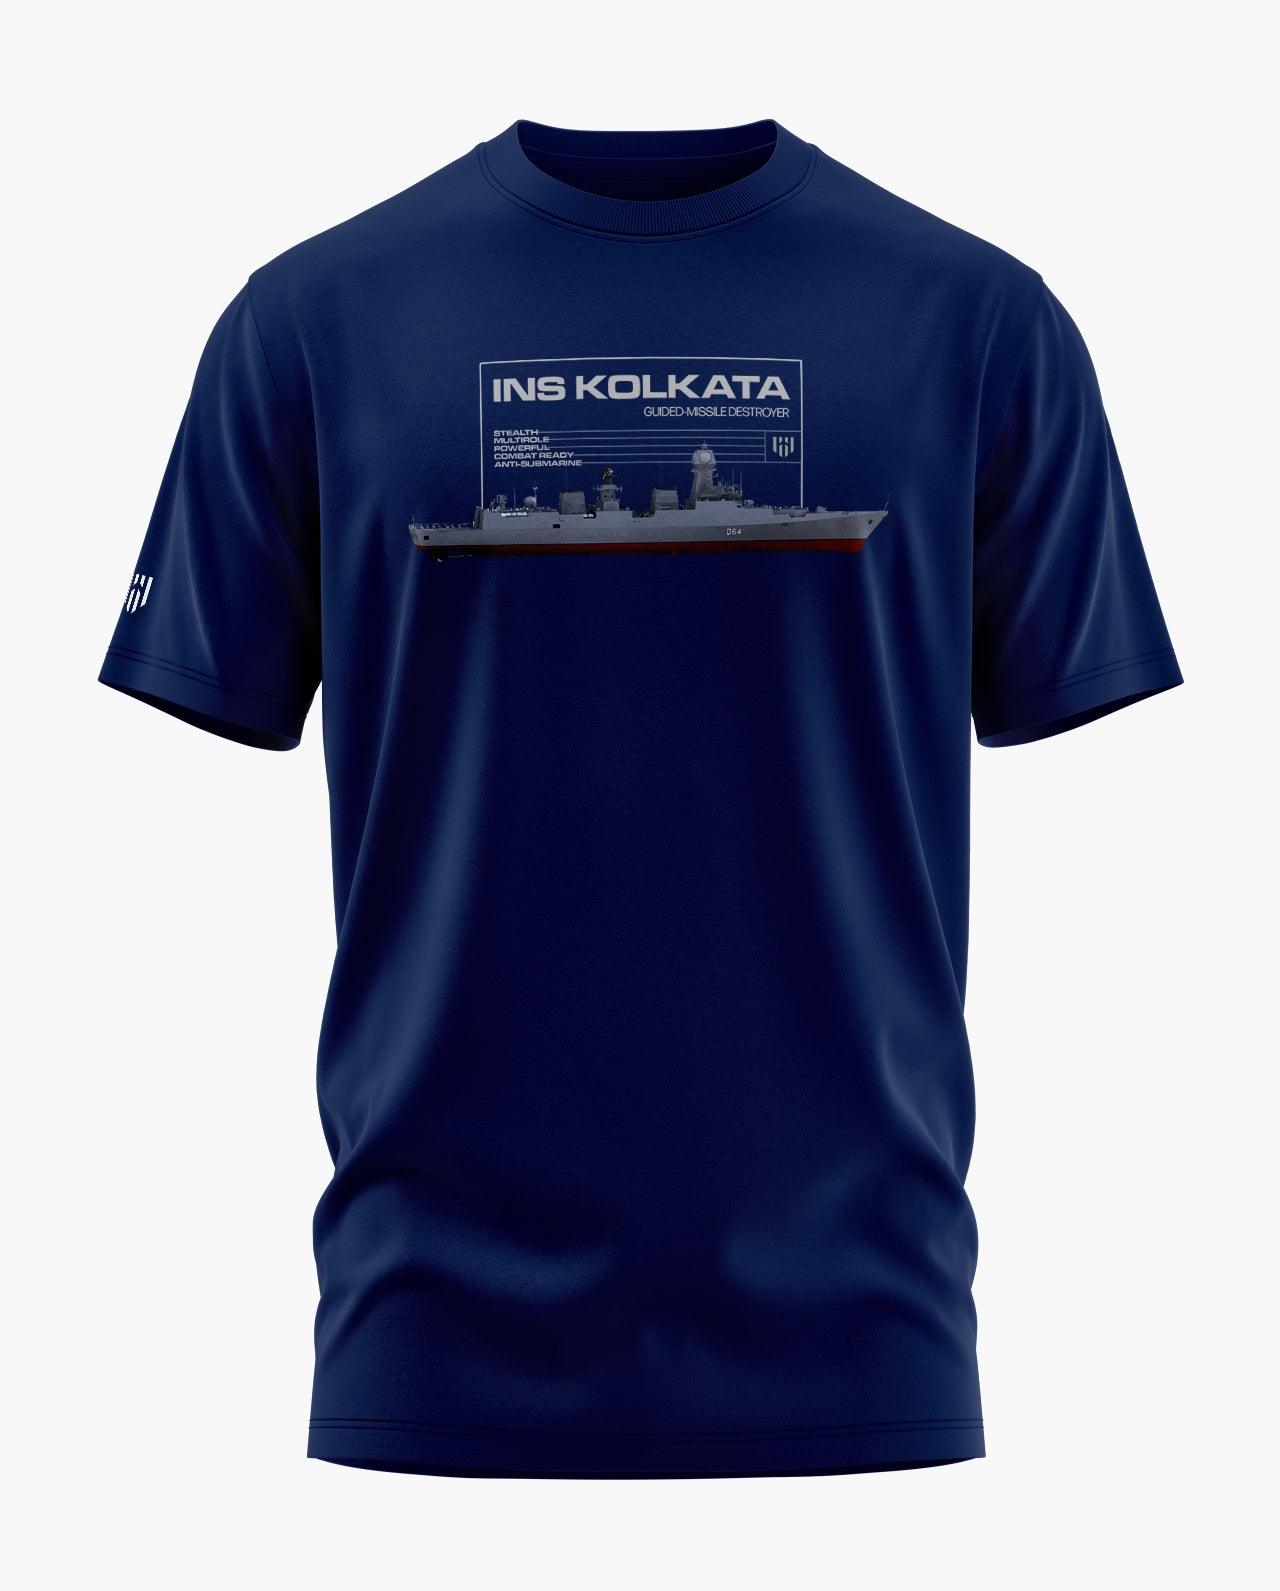 INS KOLKATA GUIDED MISSILE DESTROYER T-Shirt - Aero Armour